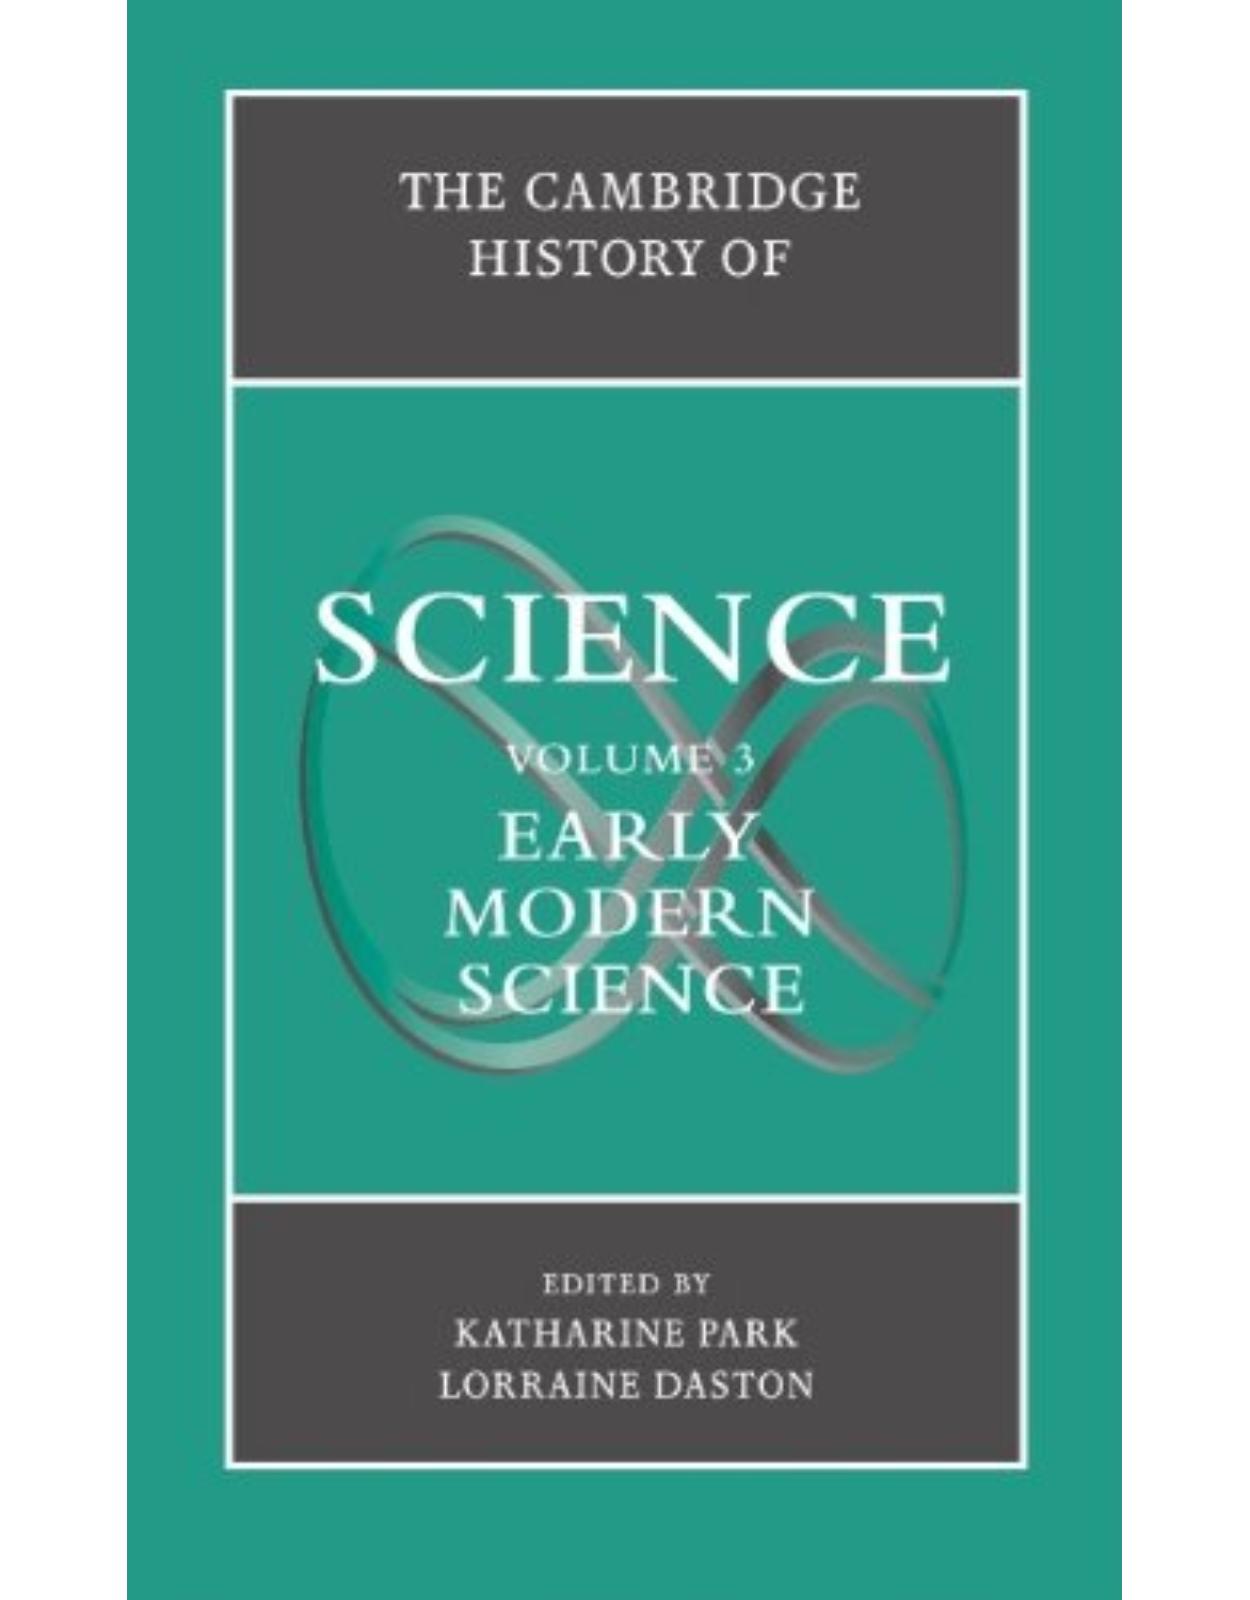 The Cambridge History of Science: Volume 3, Early Modern Science: Early Modern Science v. 3